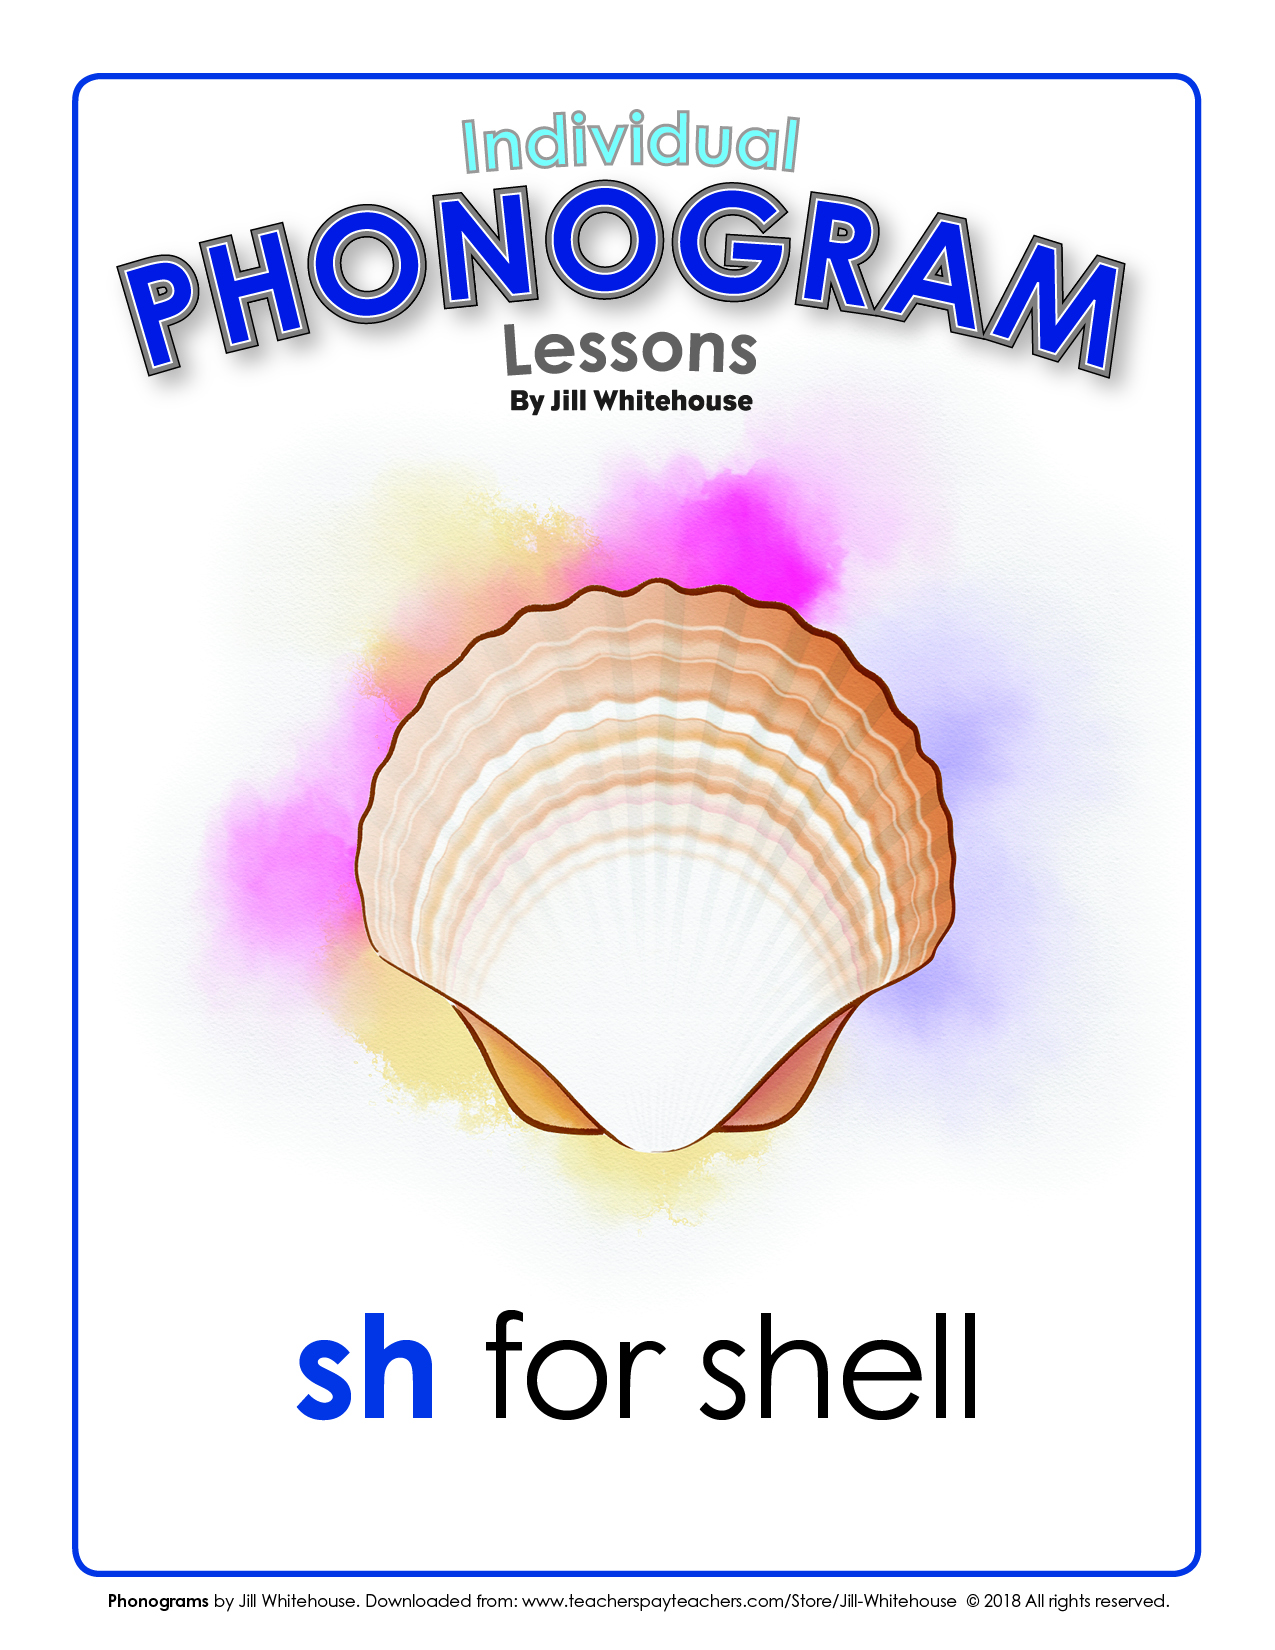 Cover image of Phonogram download -sh for shell